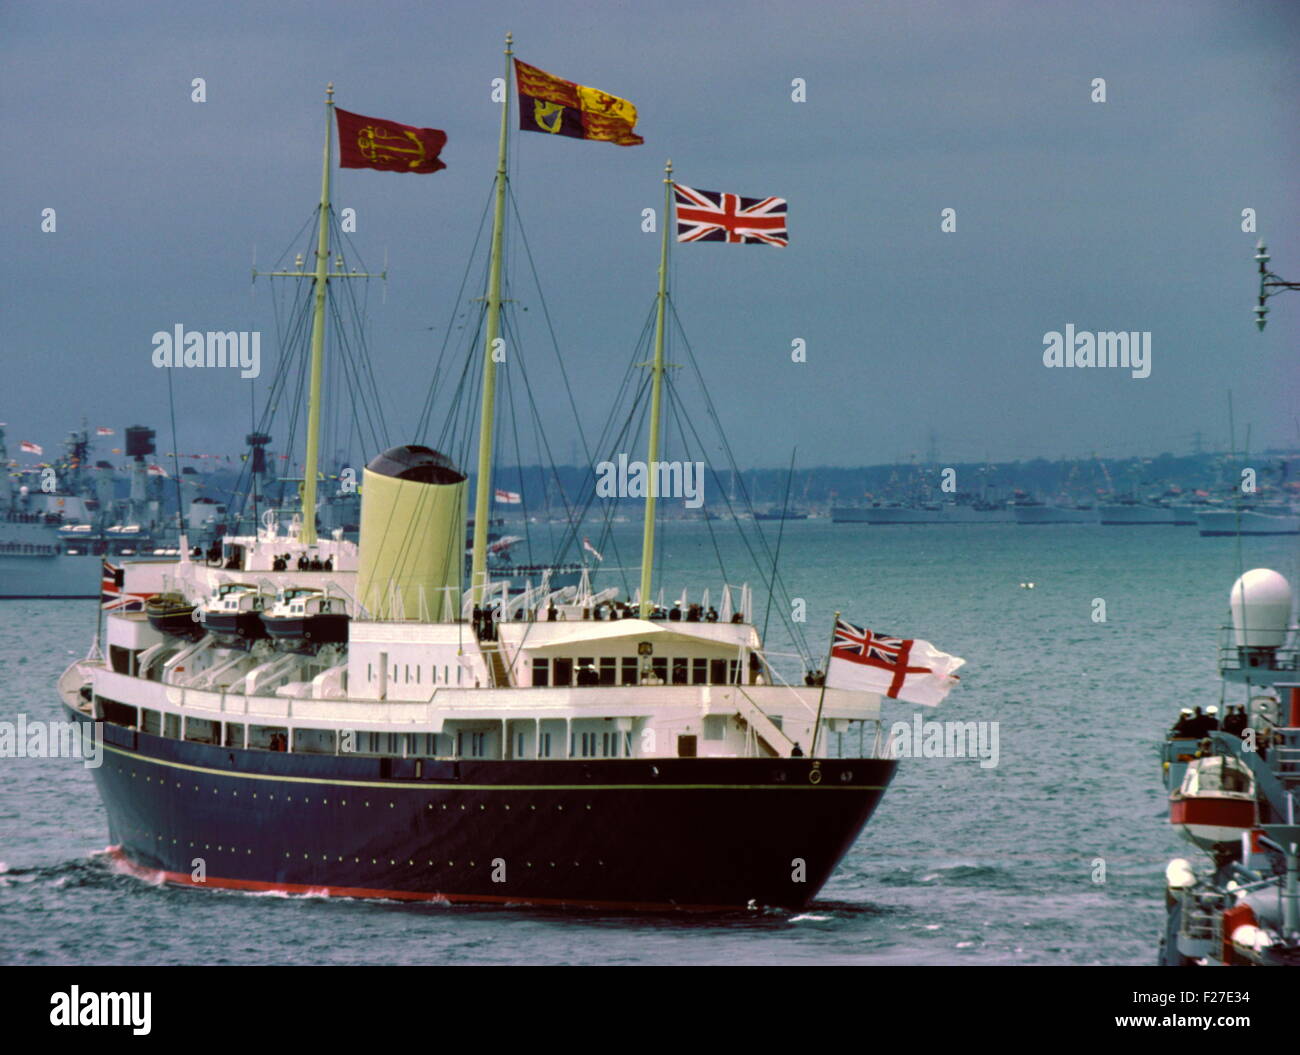 AJAX NEWS PHOTOS. 1977. SPITHEAD, ENGLAND. - ROYAL YACHT - THE ROYAL YACHT BRITANNIA WITH H.M.QUEEN ELIZABETH II EMBARKED REVIEWING THE FLEET ANCHORED AT SPITHEAD DURING THE 1977 SILVER JUBILEE FLEET REVIEW.  PHOTO:JONATHAN EASTLAND/AJAX REF:703545 Stock Photo